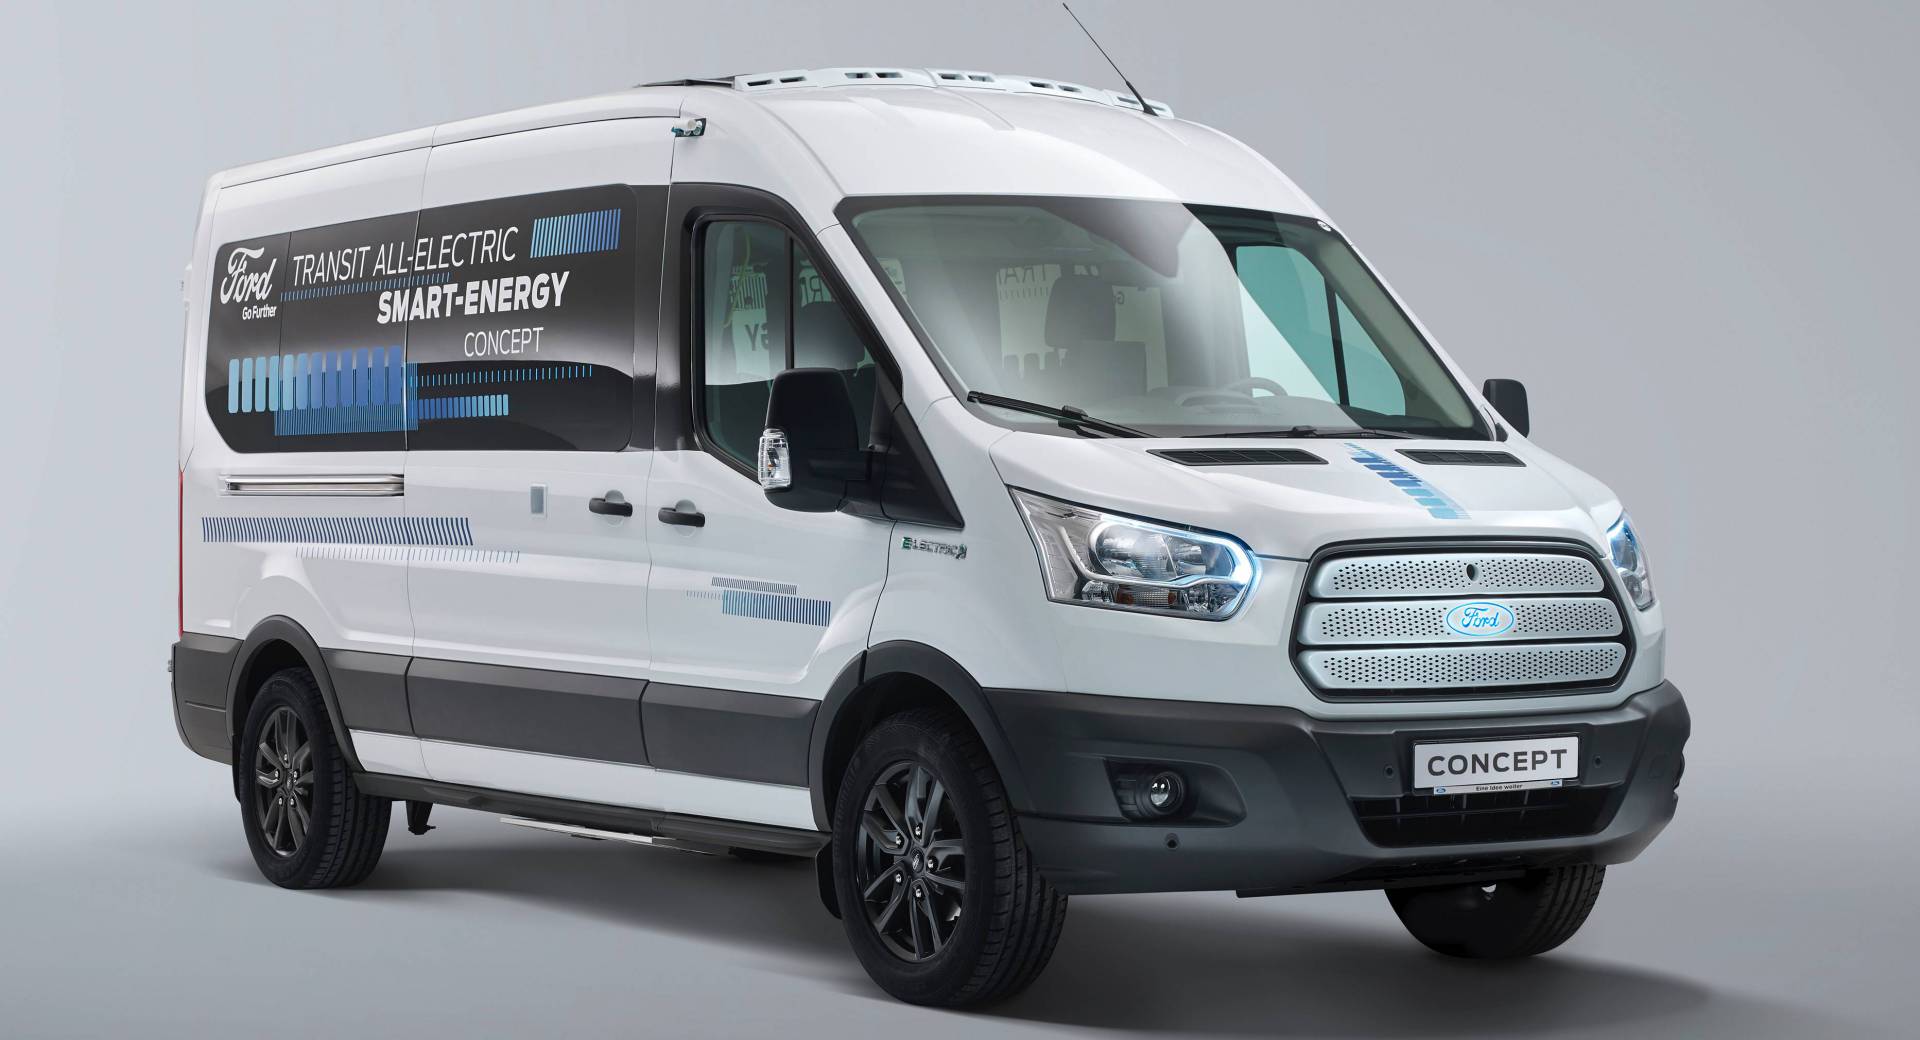 Ford Transit Electric Van Coming In 2021 Previewed By ...